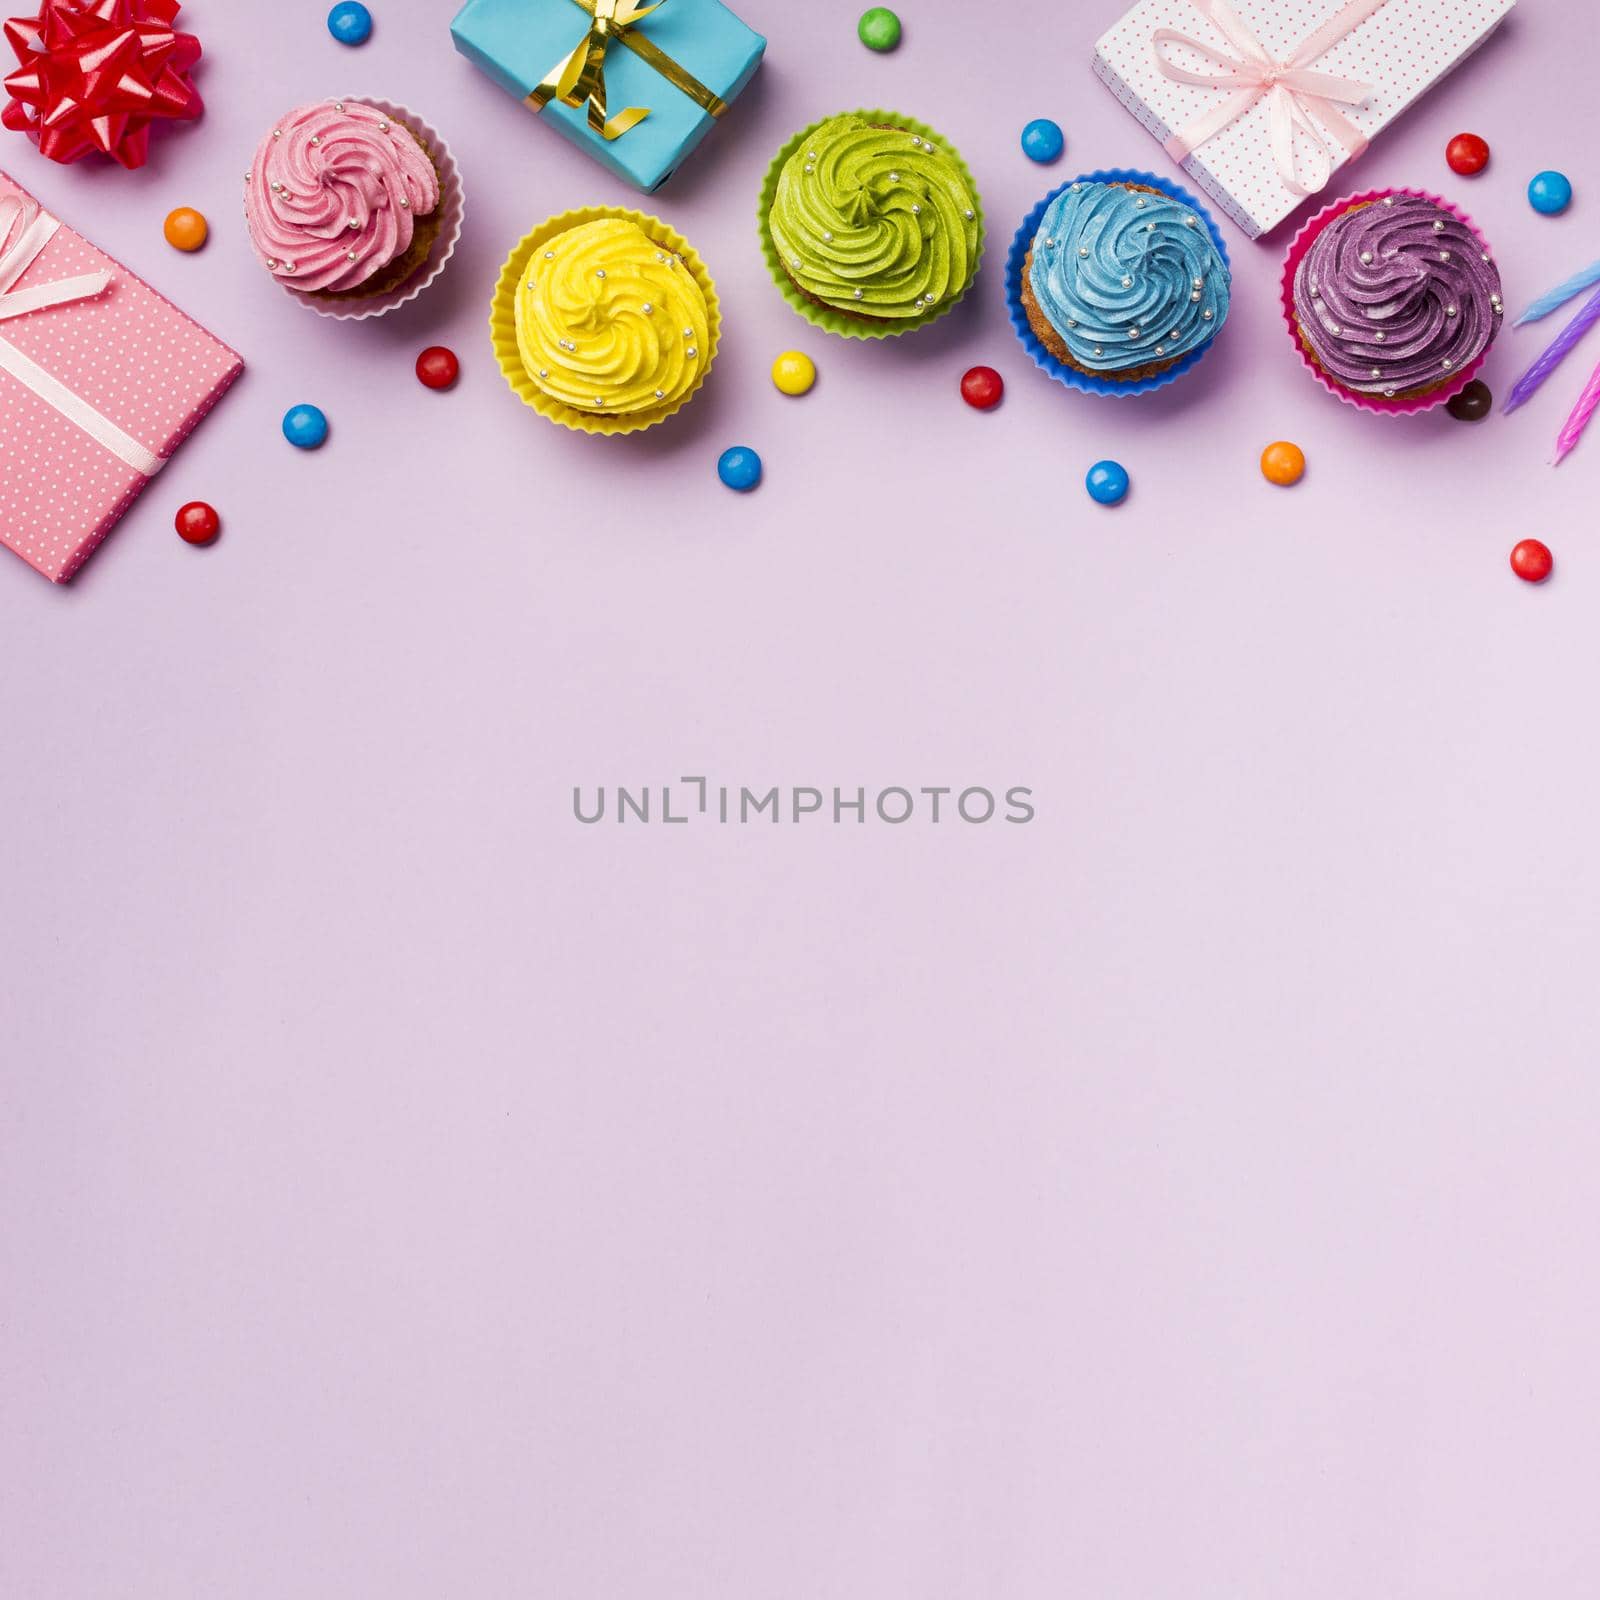 colorful muffins gems with wrapped gift boxes pink backdrop by Zahard